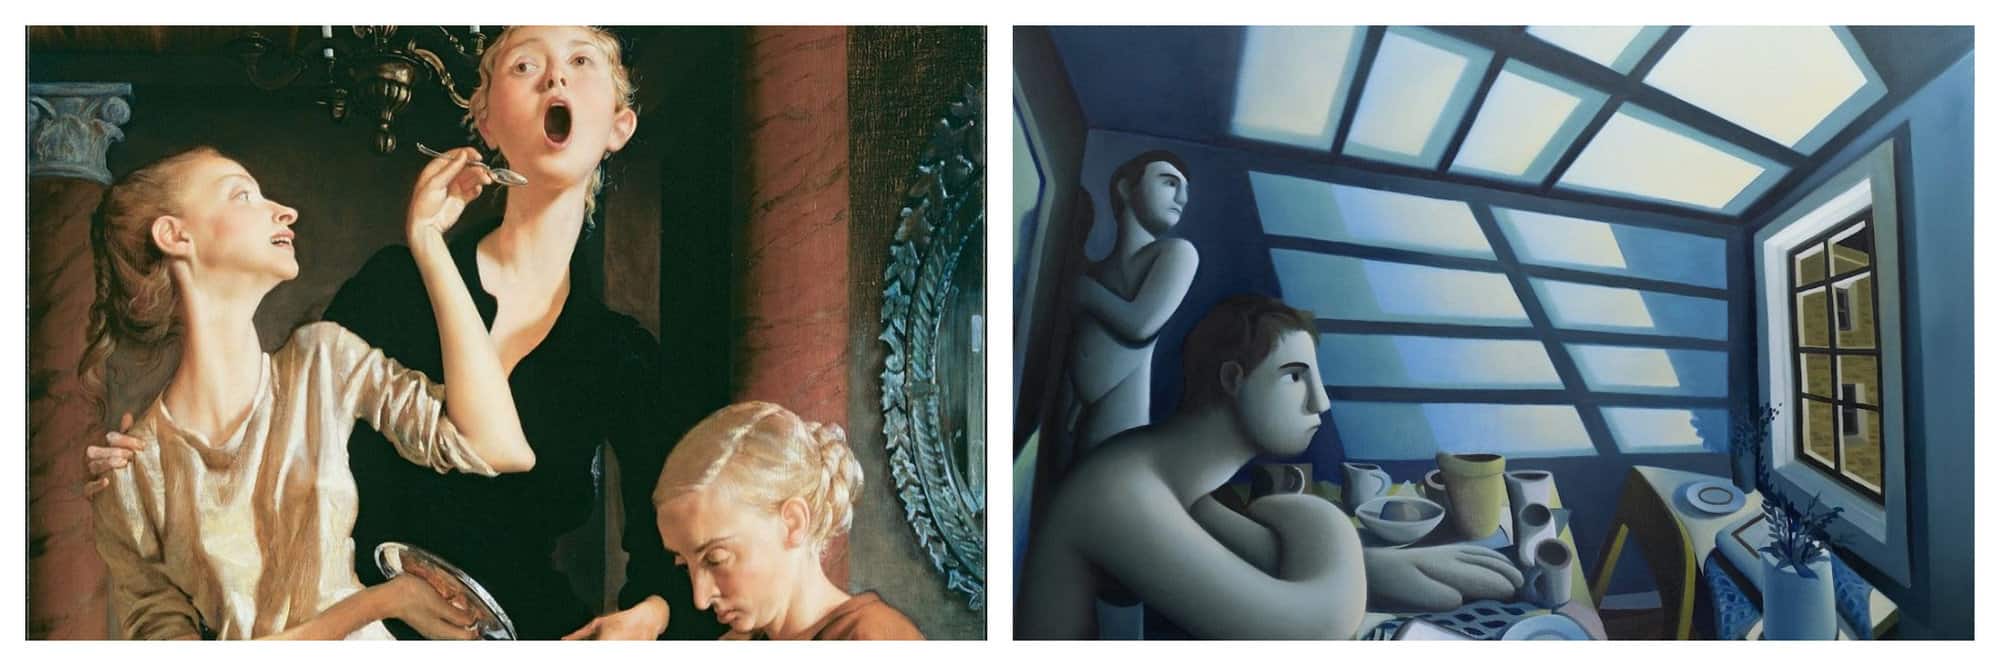 Left: A painting of 3 women sharing a meal and their house chores. Right: A painting of 2 naked men confined during the first Covid-19 lockdown.